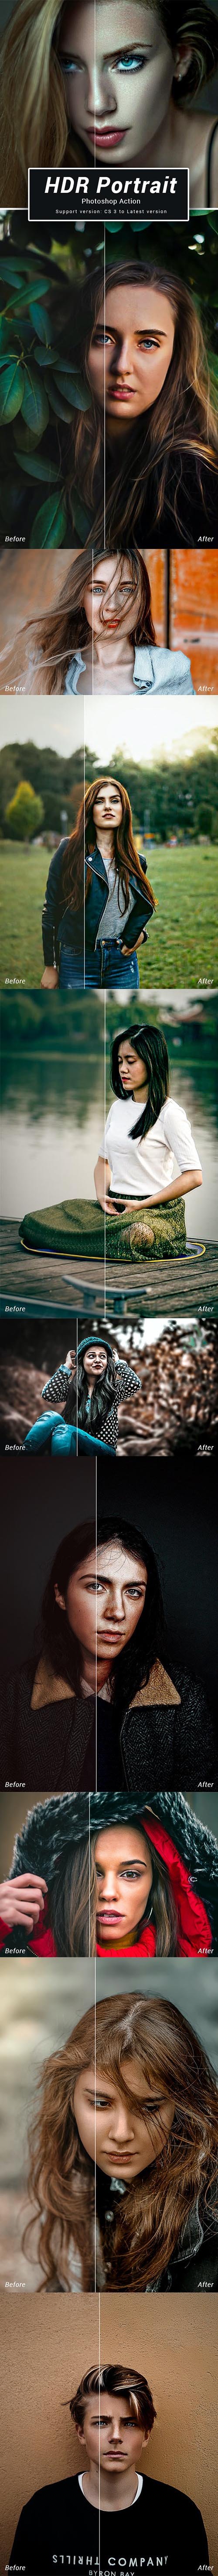 GraphicRiver - HDR Photoshop Action 26991913